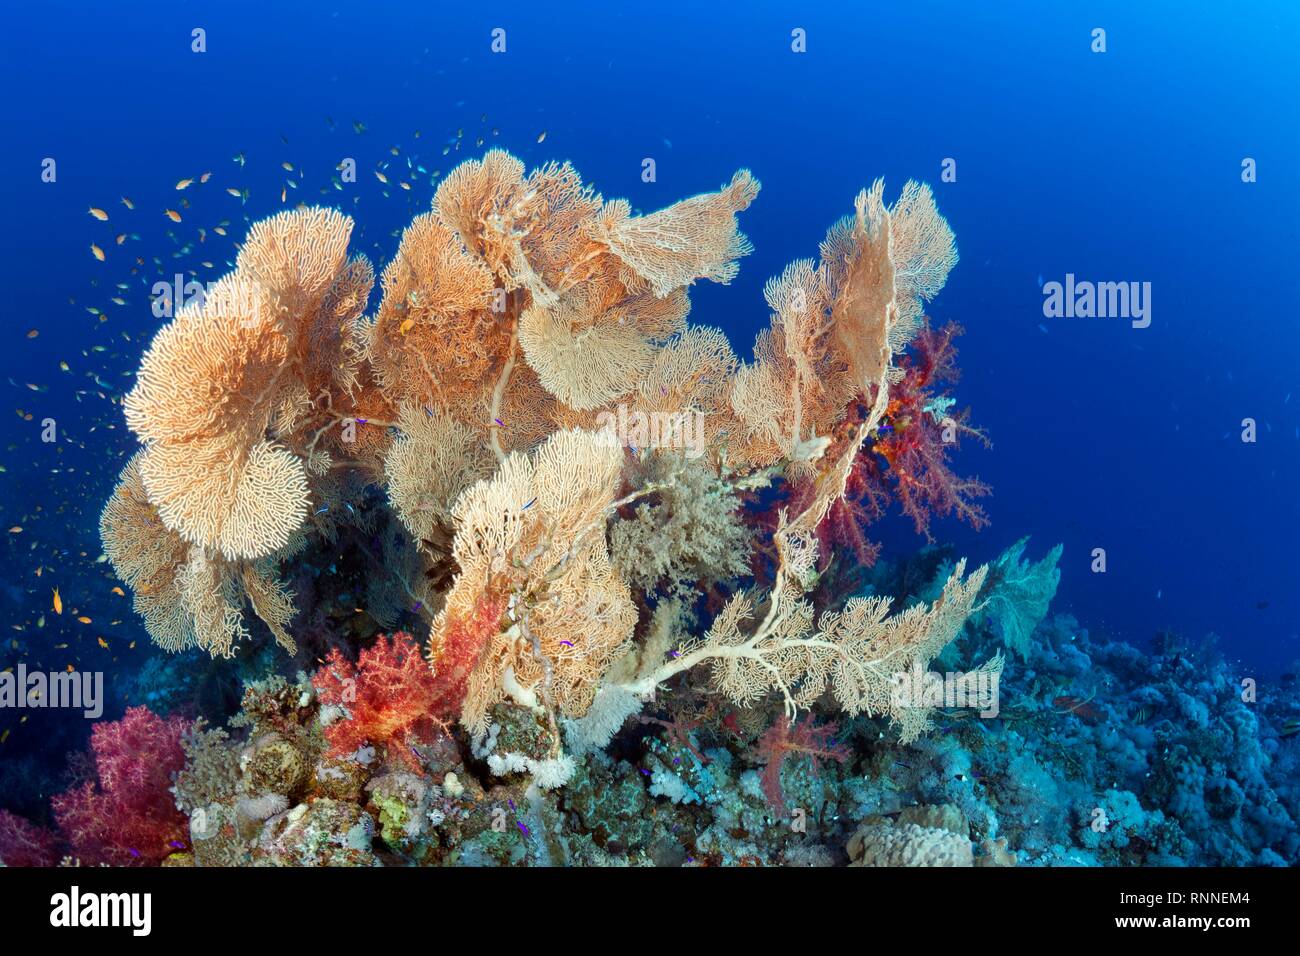 Reef top with group of gorgonians (Annella mollis) and Klunzinger soft corals (Dendronephthya klunzingeri), Red Sea, Egypt Stock Photo